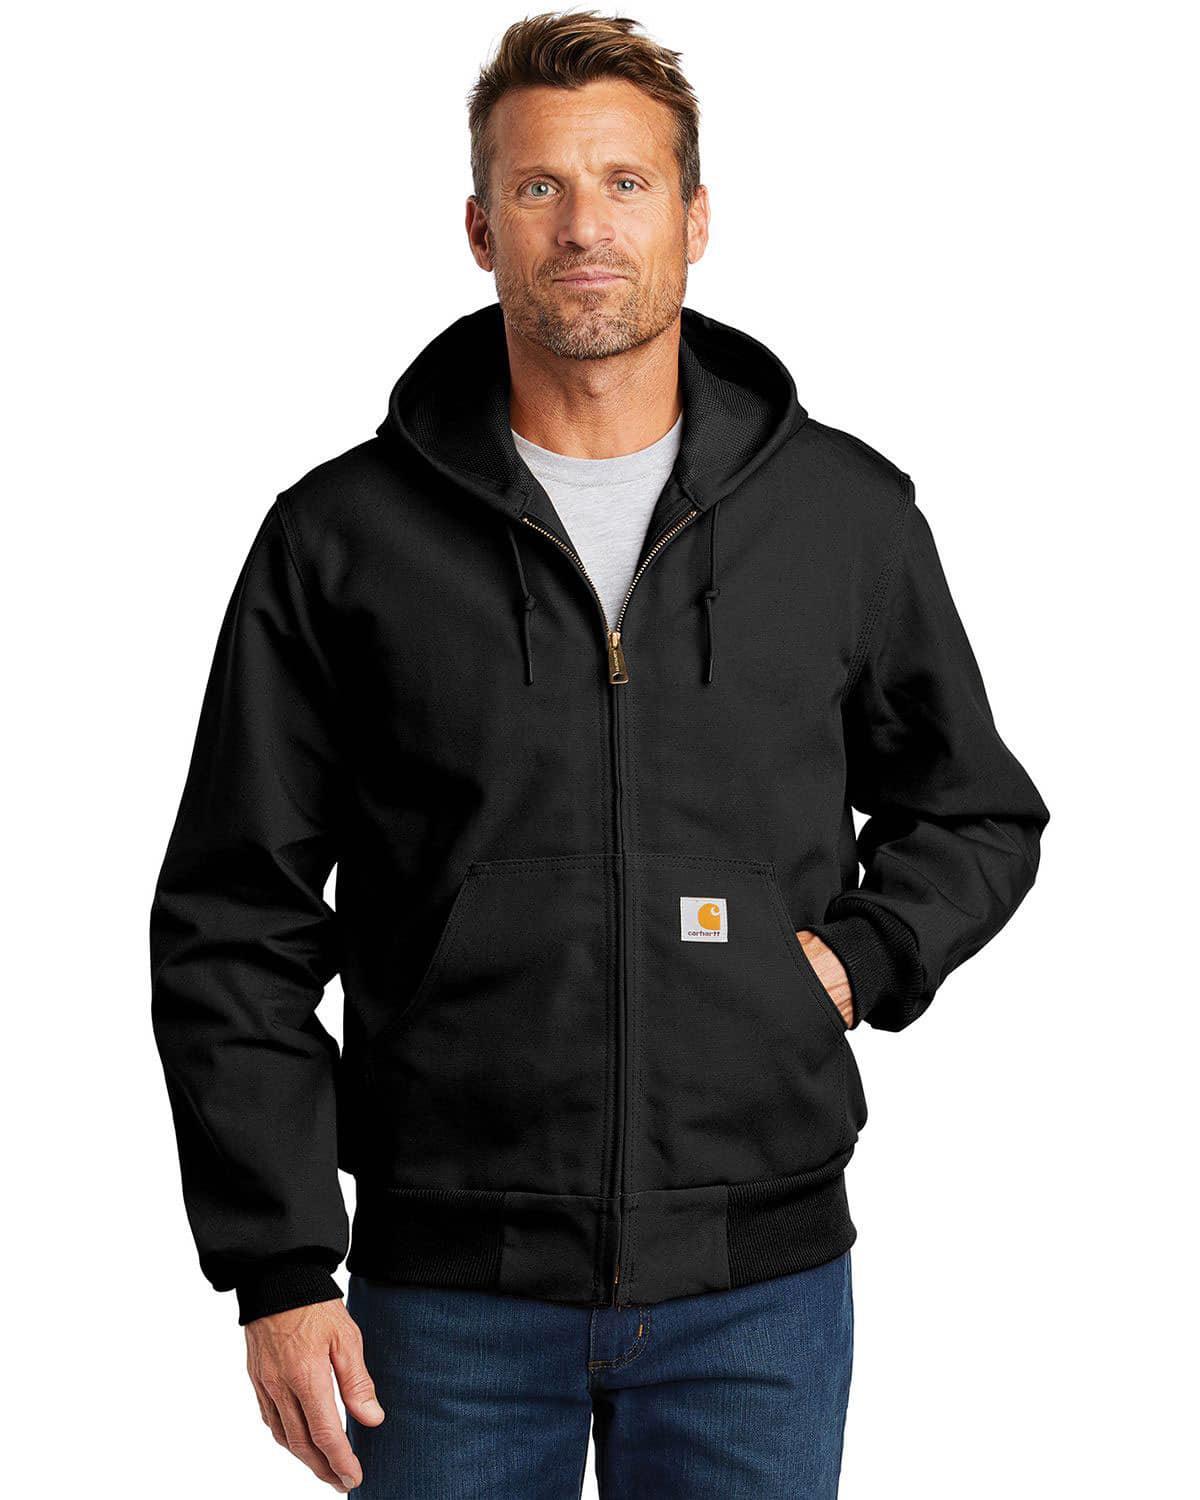 Carhartt CTTJ131 Tall Thermal-Lined Duck Active Jacket